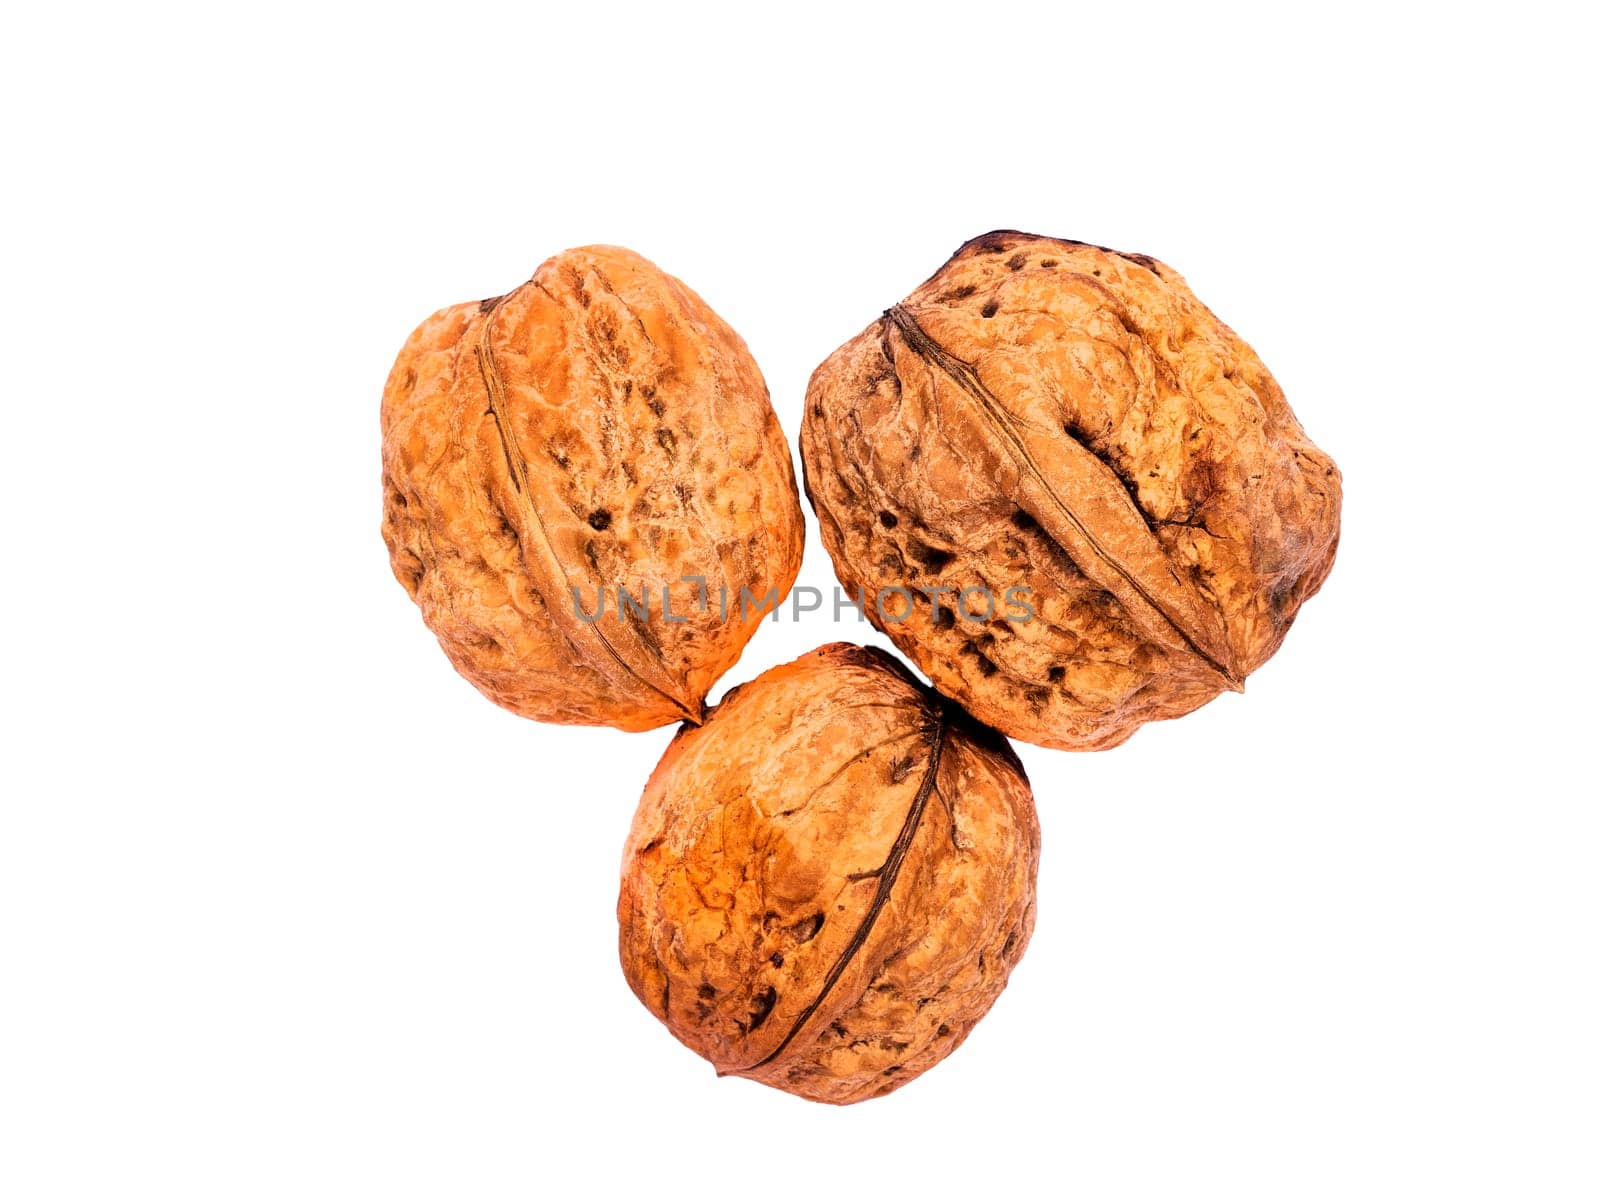 Top view of three walnuts, isolated on a white background